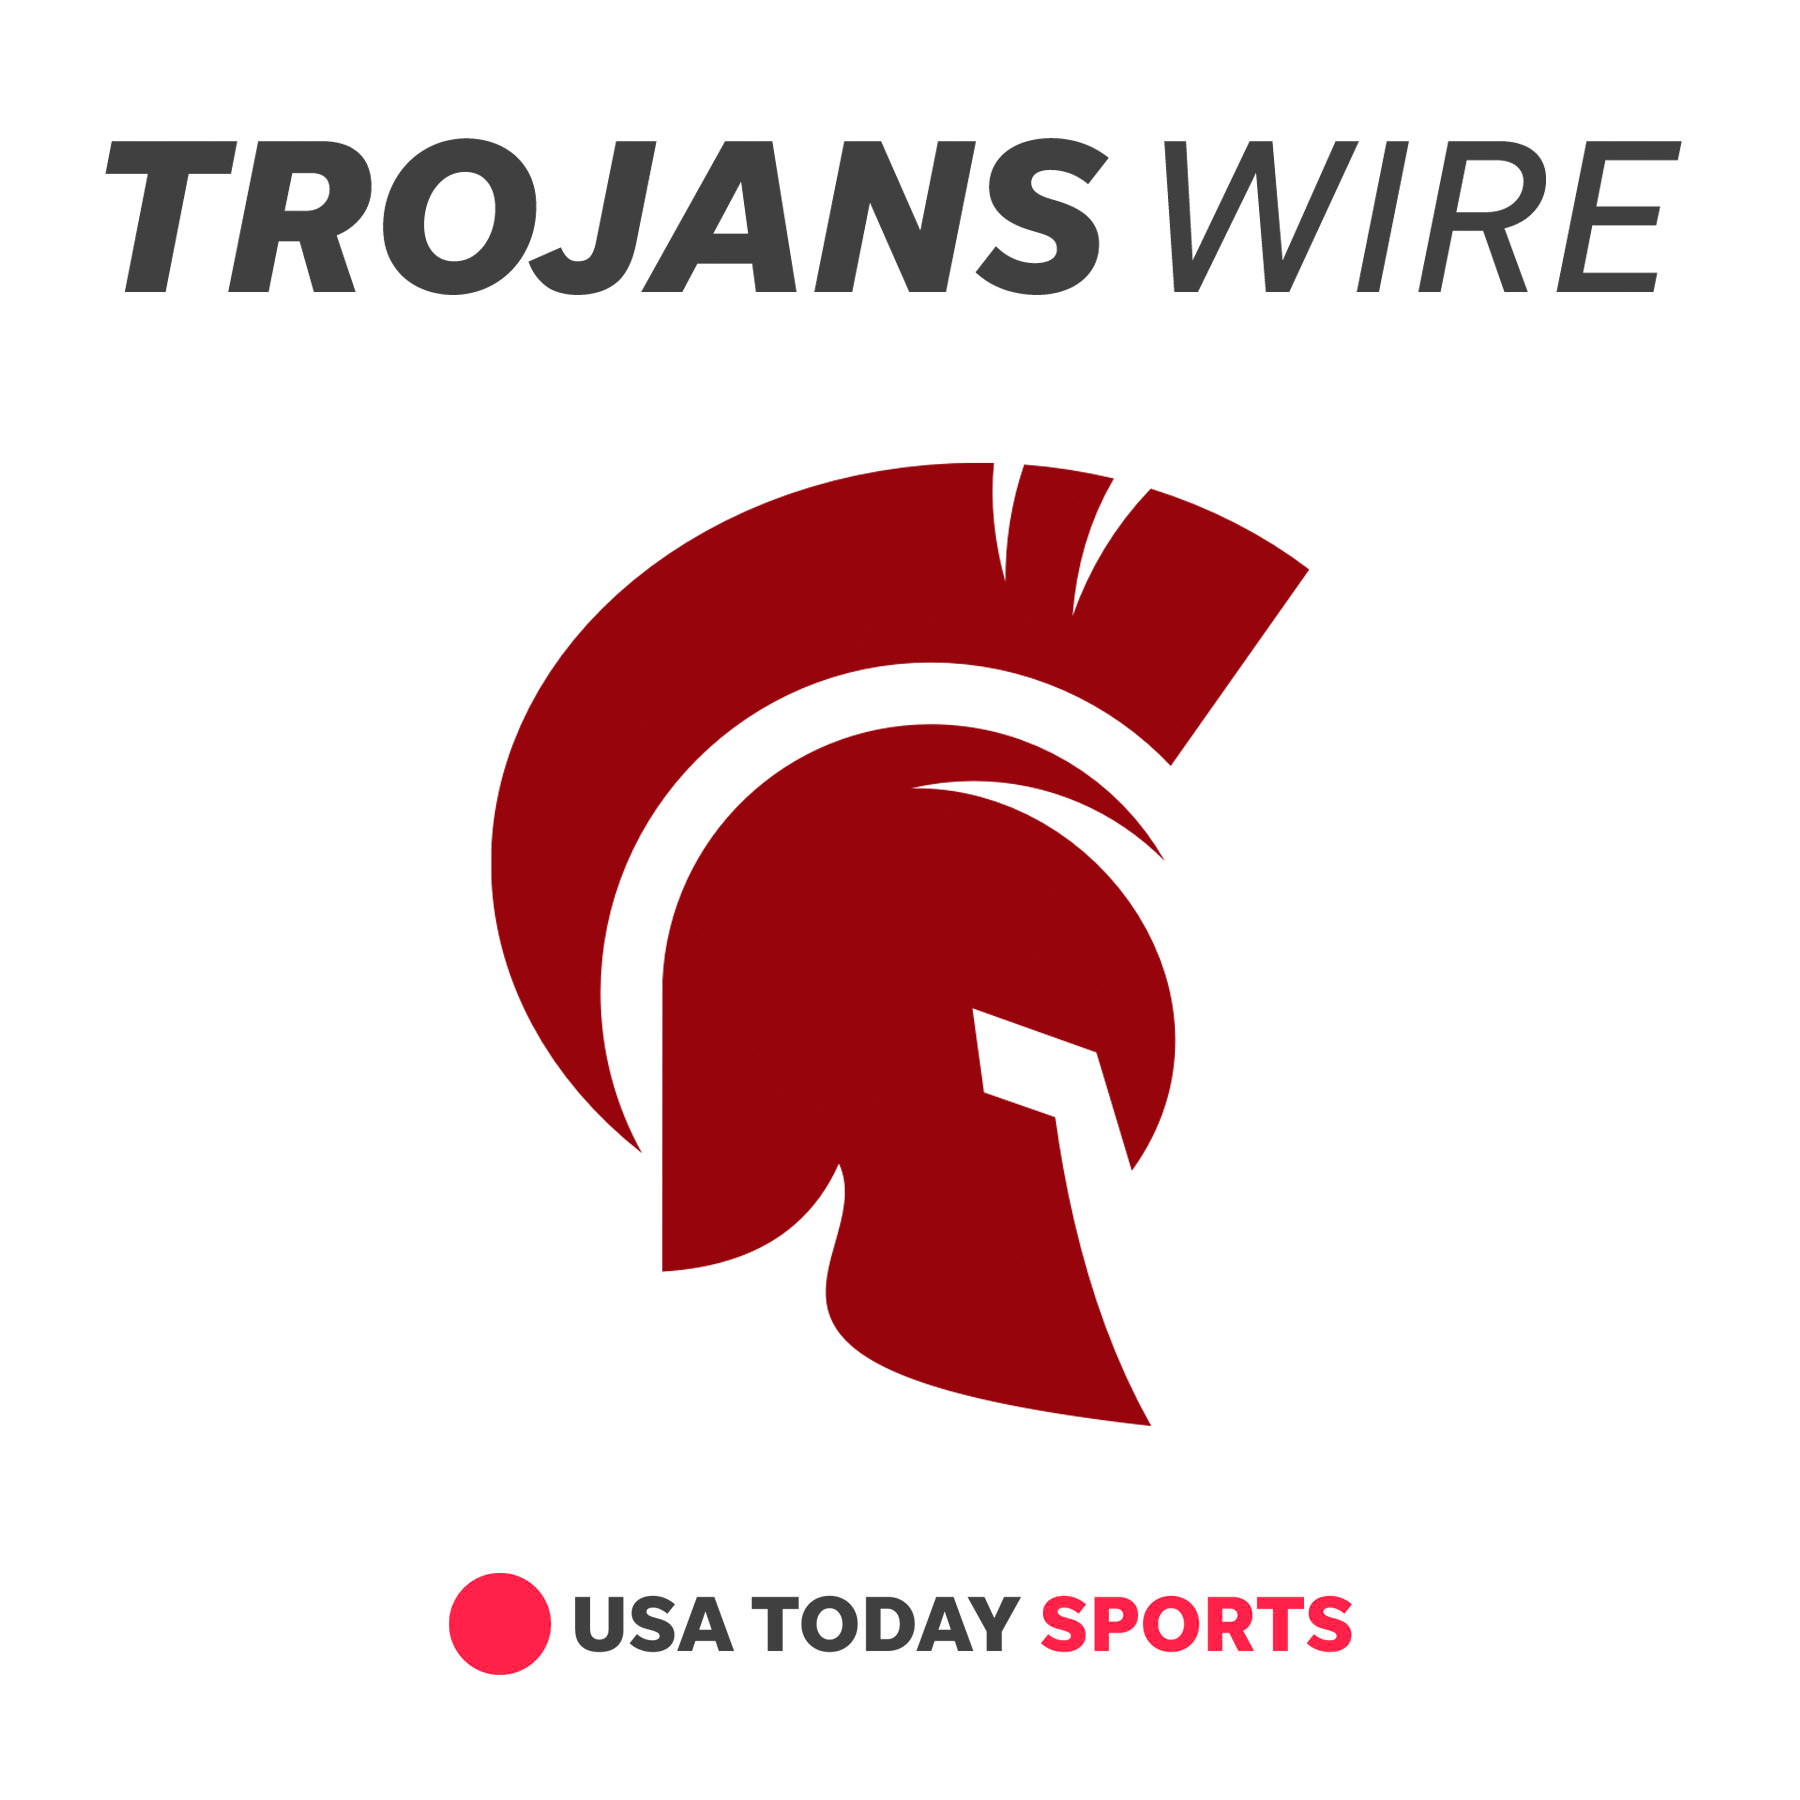 Trojans Wired Women's Basketball Report for February 3